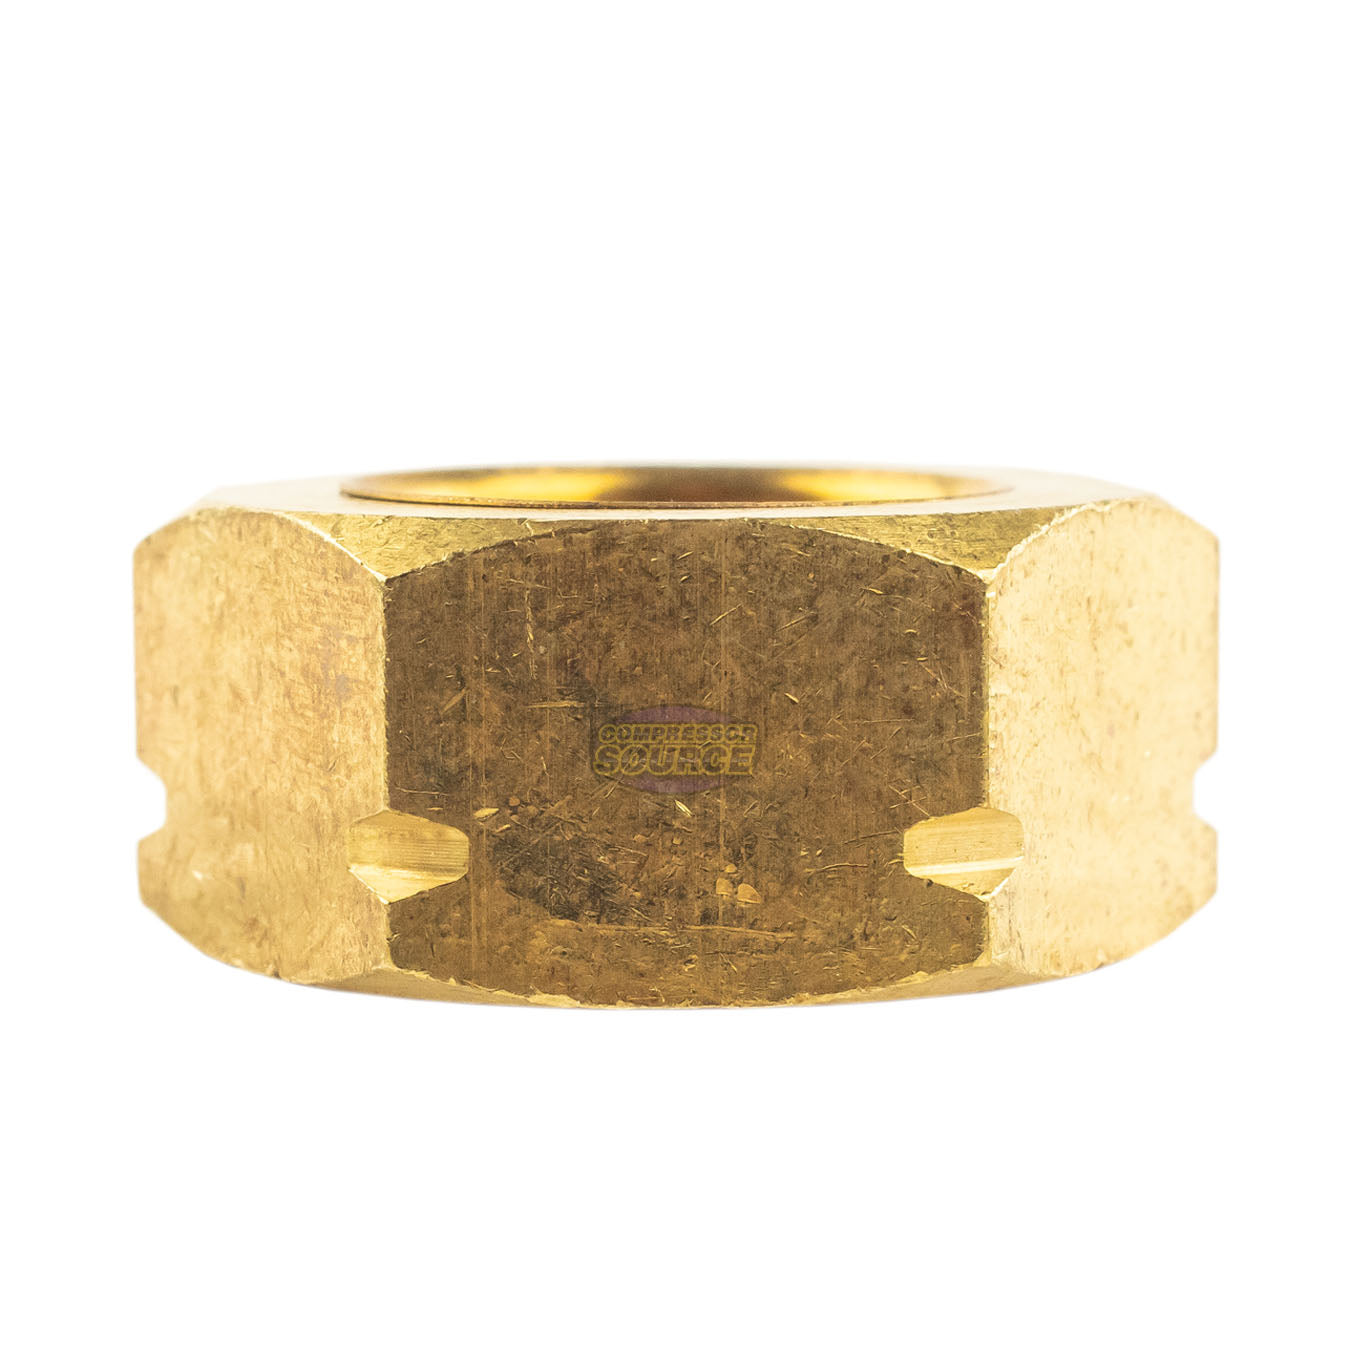 0124 04 00 40 - Complementary Brass Fittings, Reducers, Olives and